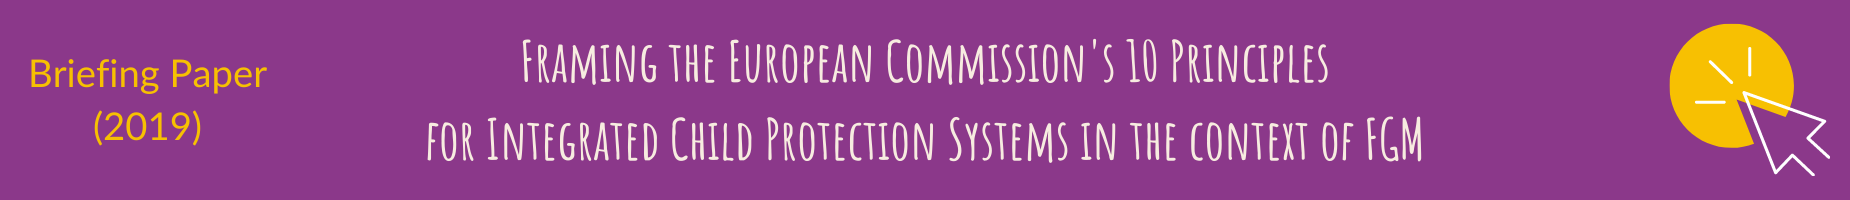 Framing the European Commission's 10 Principles for Integrated Child Protection Systems in the context of FGM - Briefing Paper (2019)